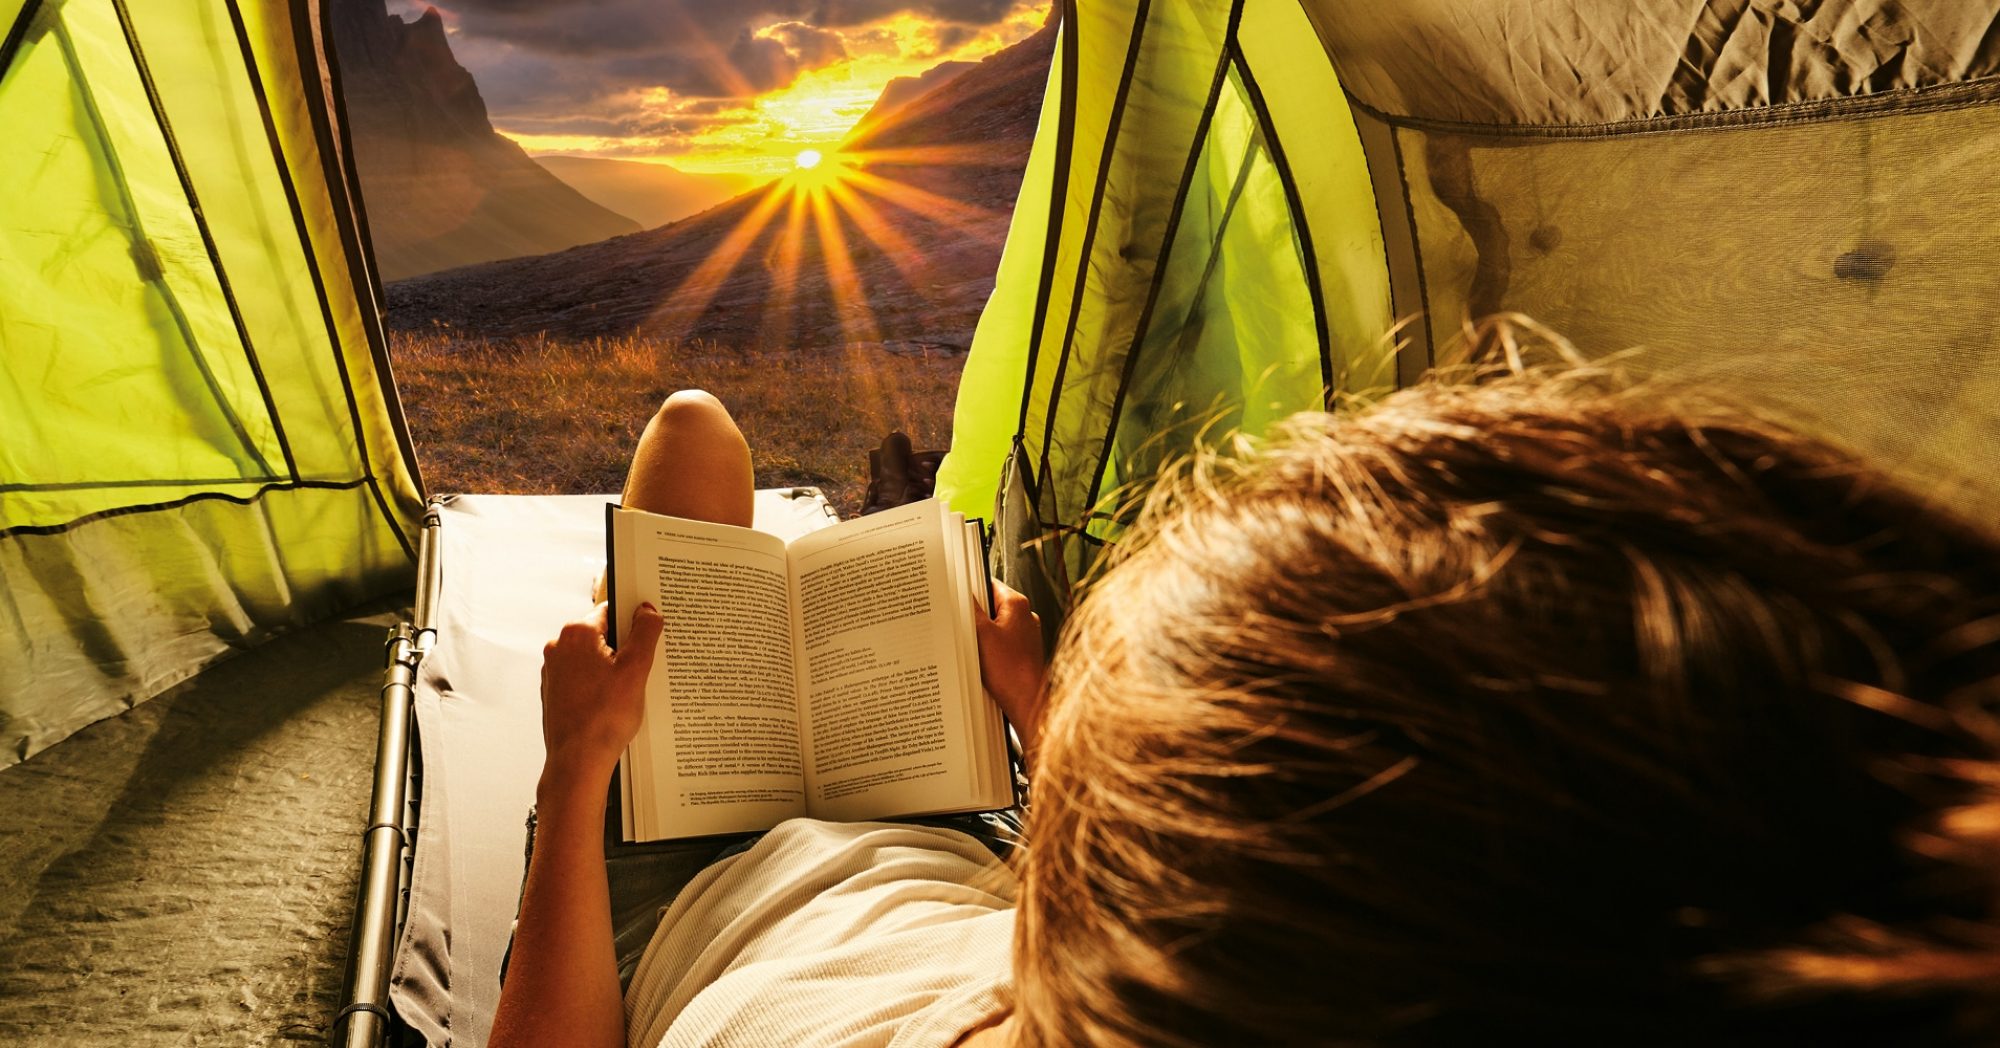 Girl relaxing and reading on LayBakPak recliner camp bed inside a tent